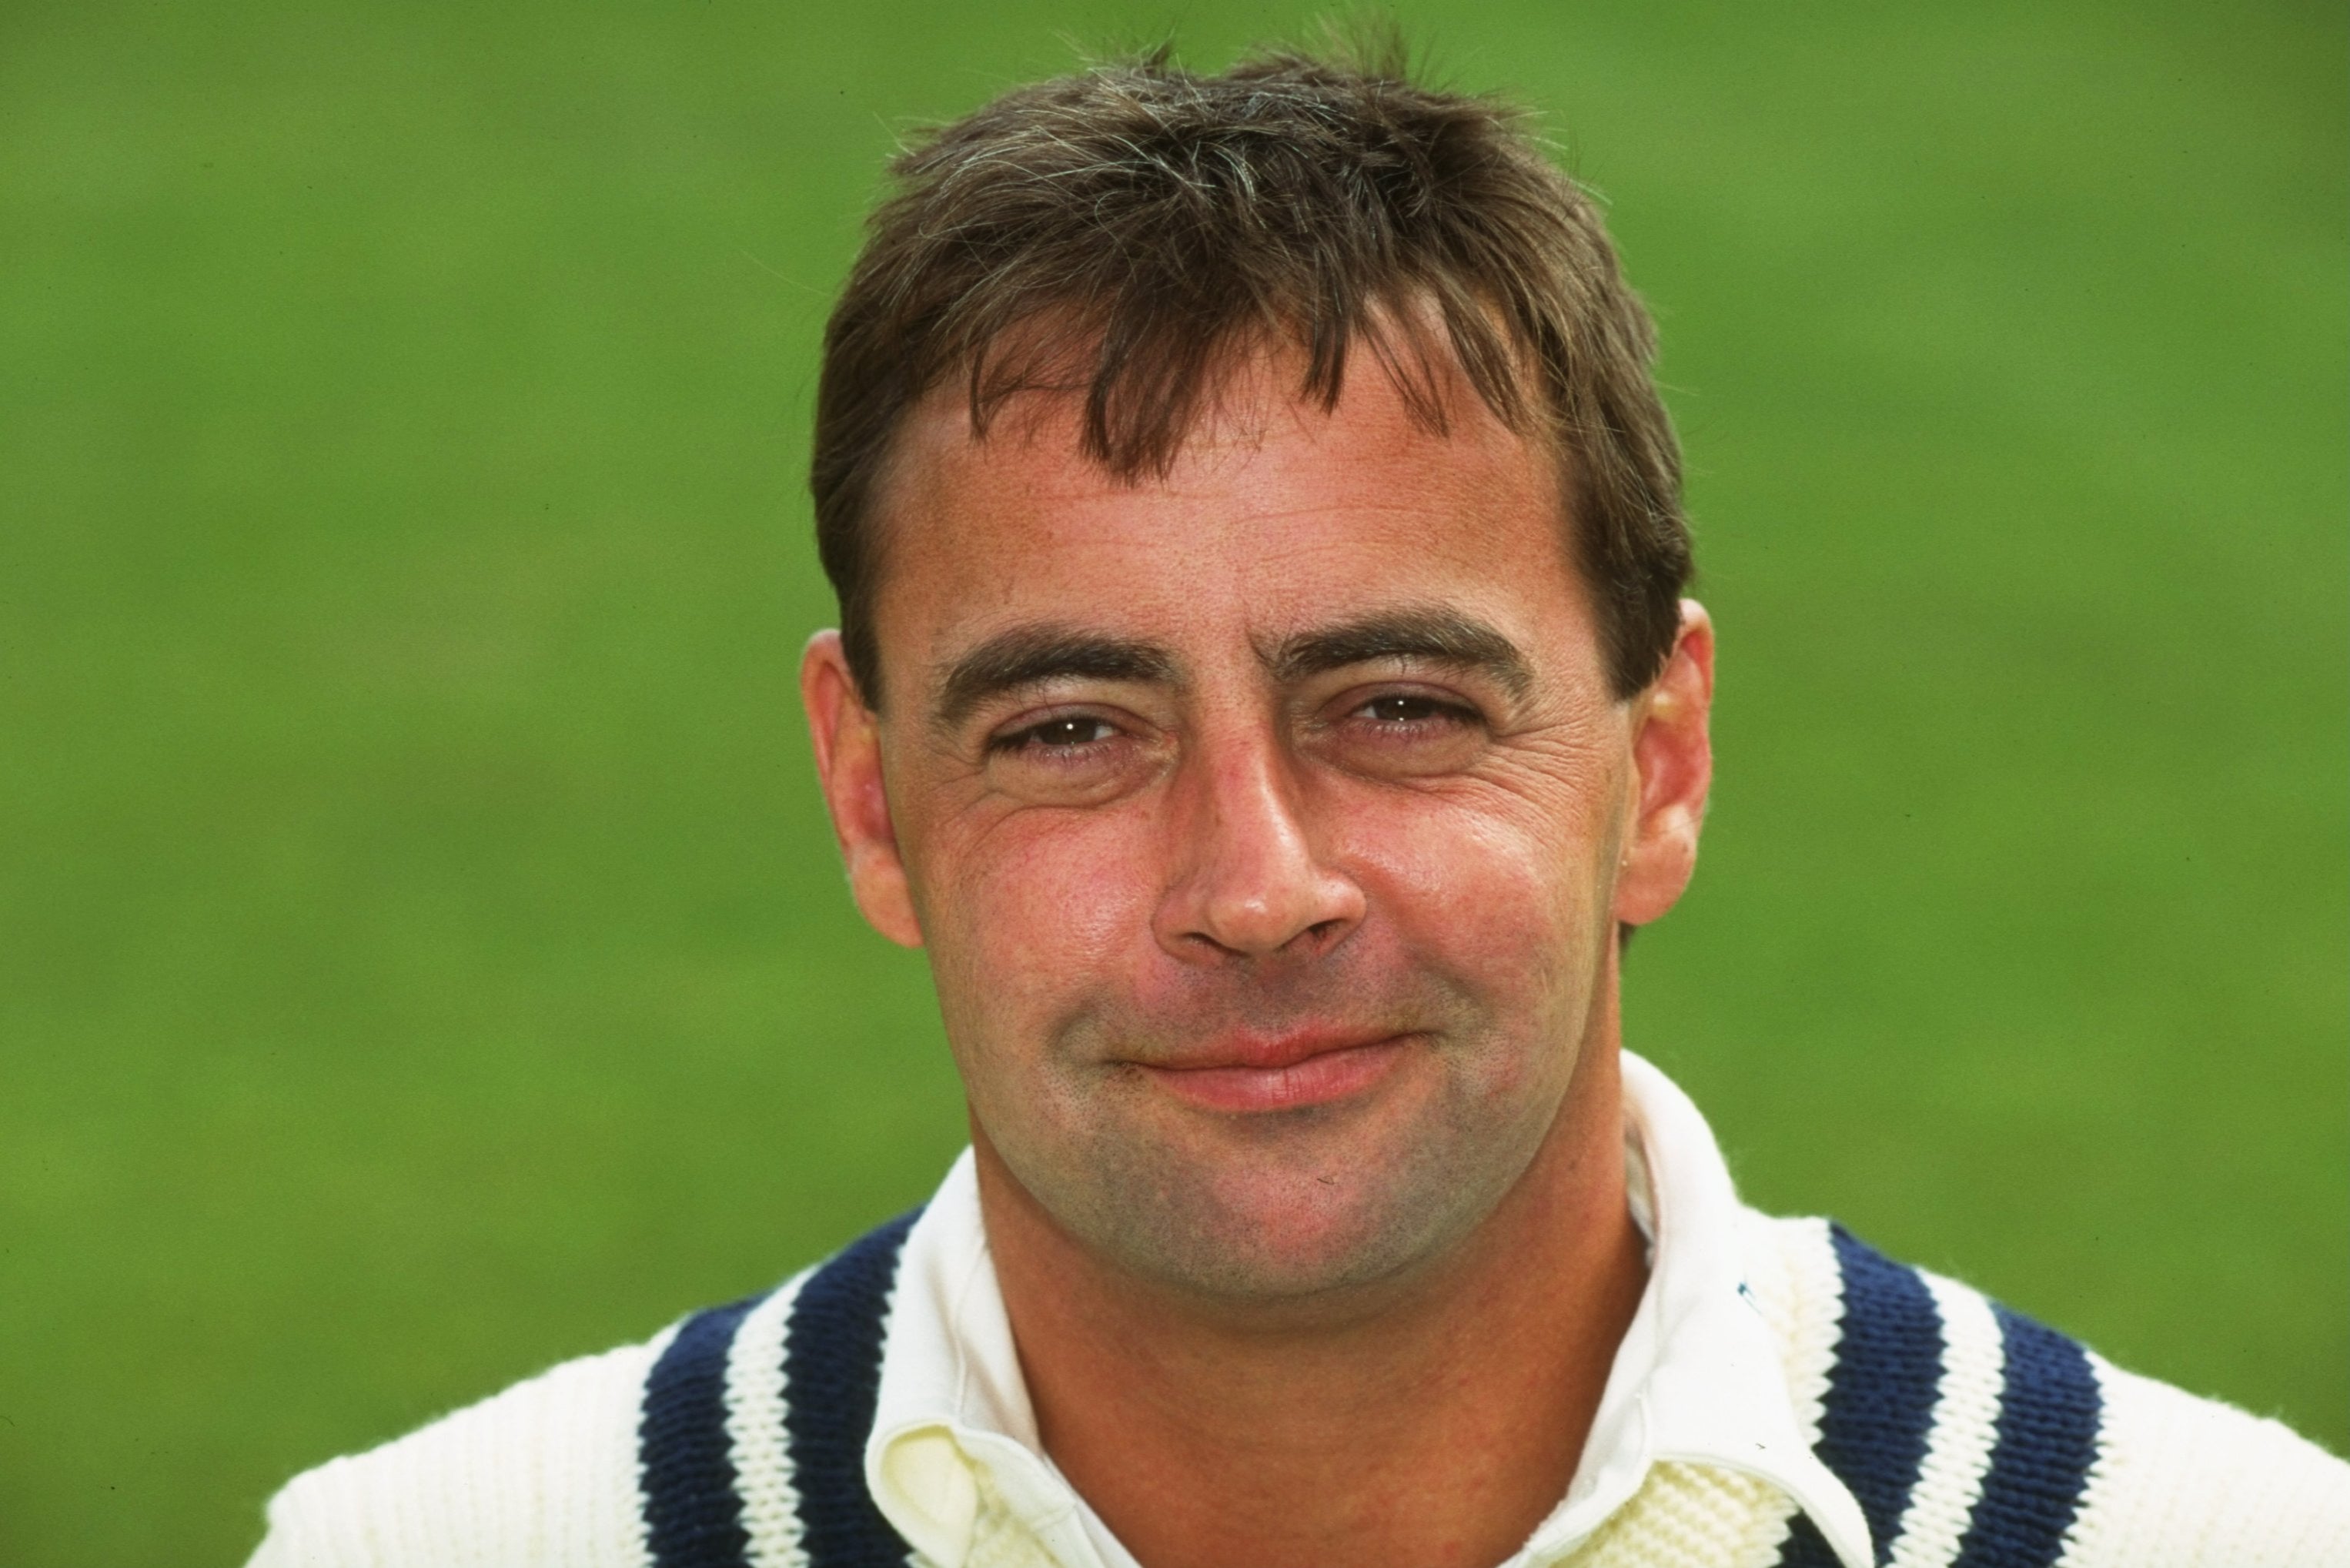 Cowdrey scored thousands of runs for his county